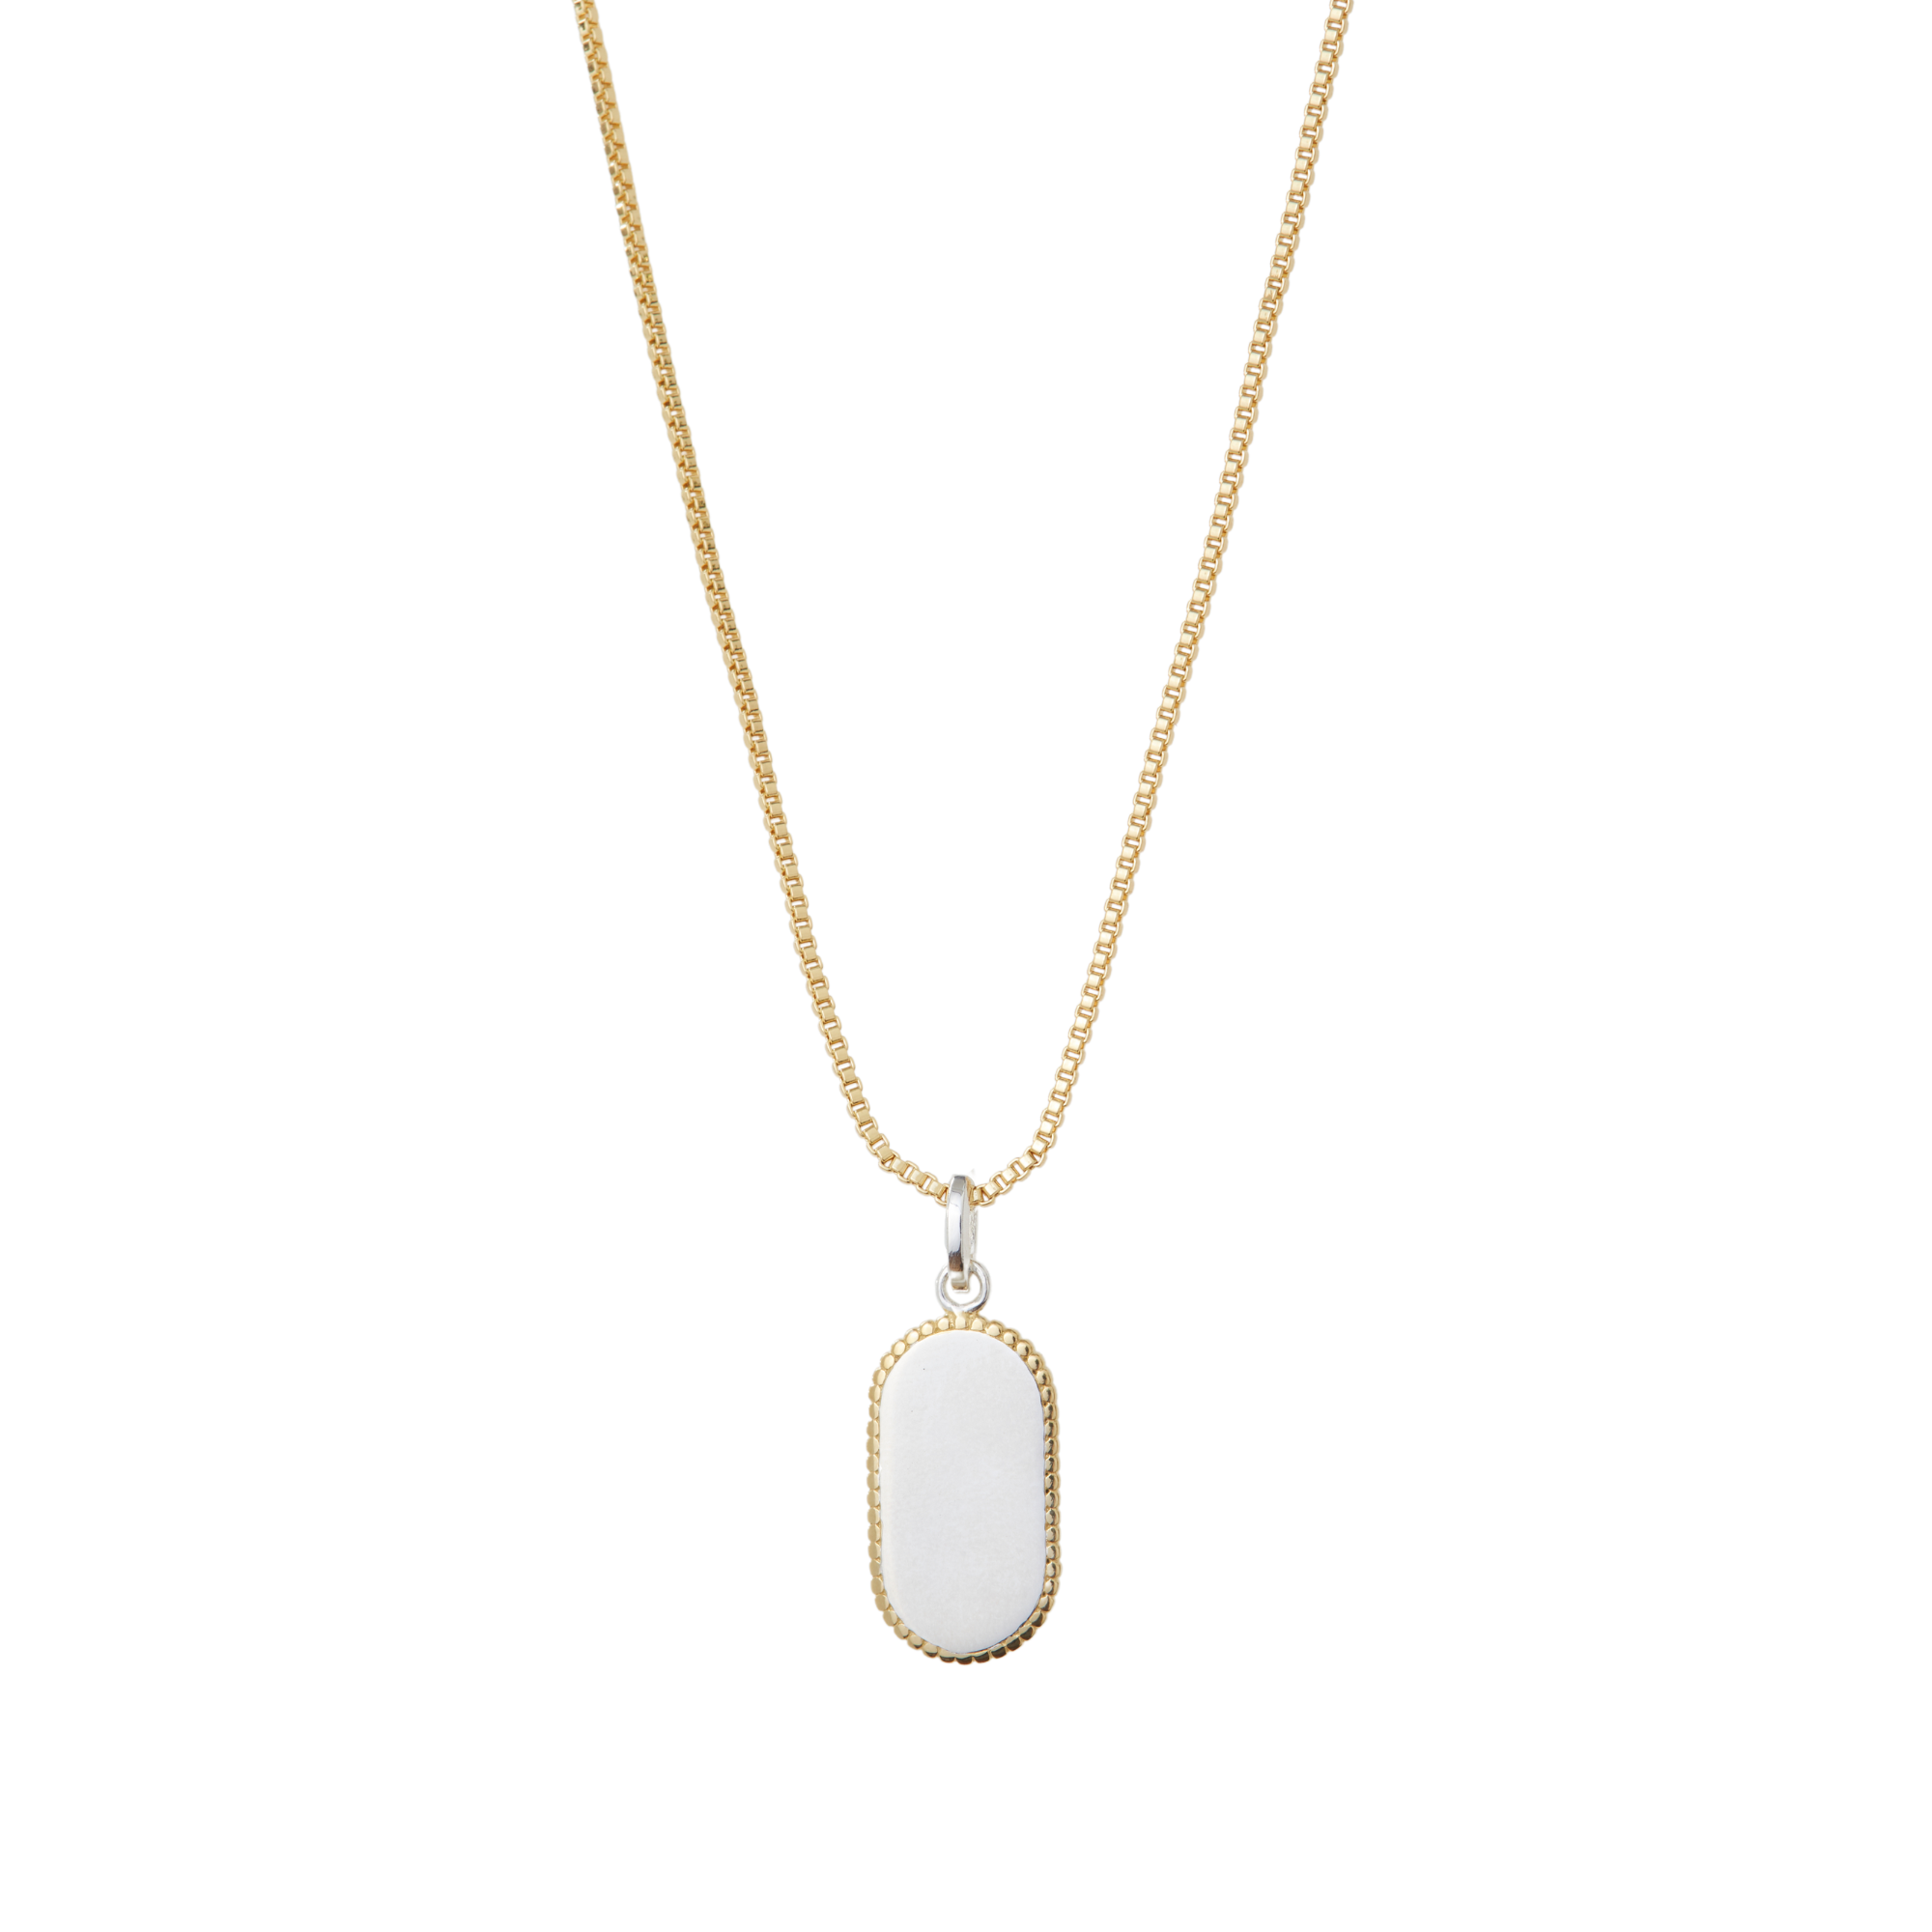 THE ENGRAVABLE TWO TONE OVAL PENDANT